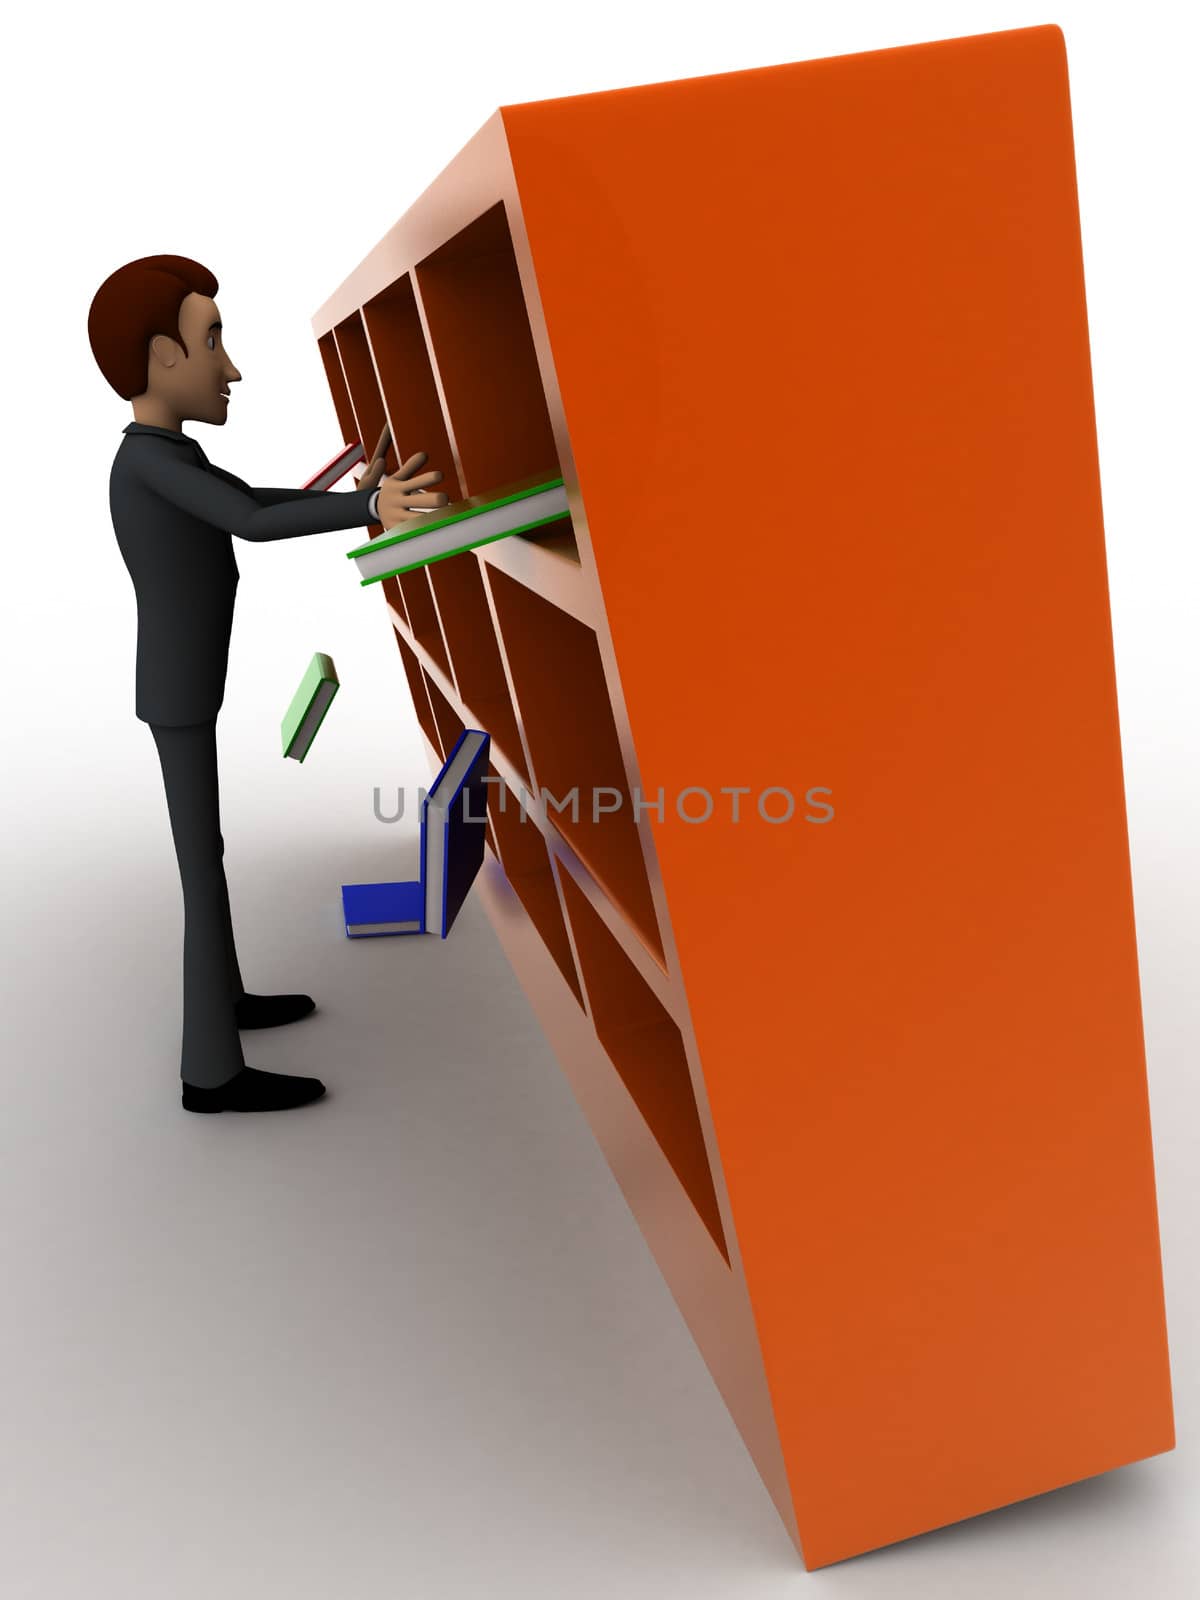 3d man under falling books and book shelf concept by touchmenithin@gmail.com